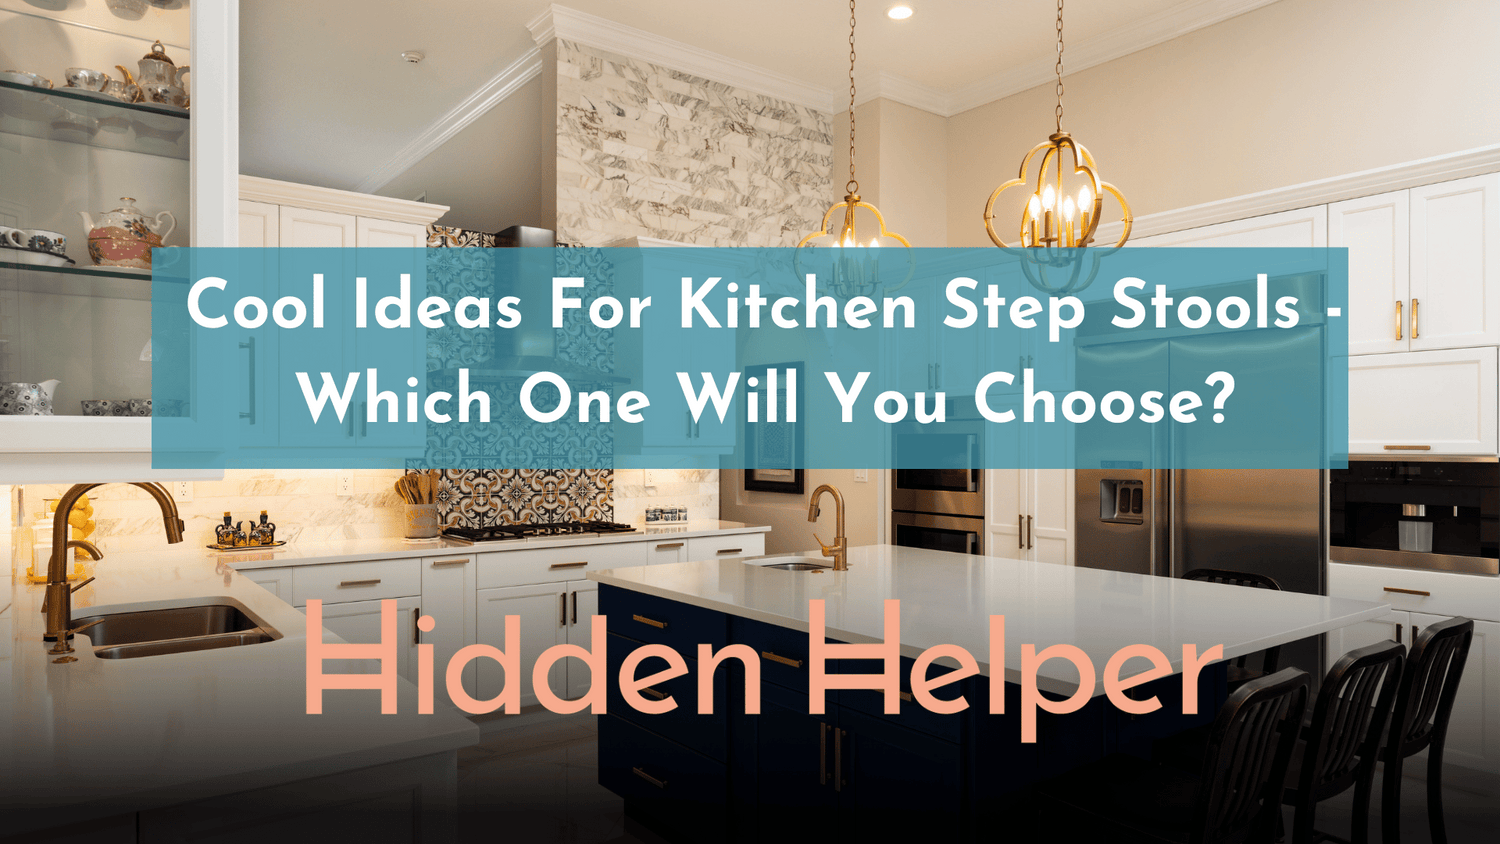 10 Cool Ideas For Kitchen Step Stools - Which One Will You Choose?